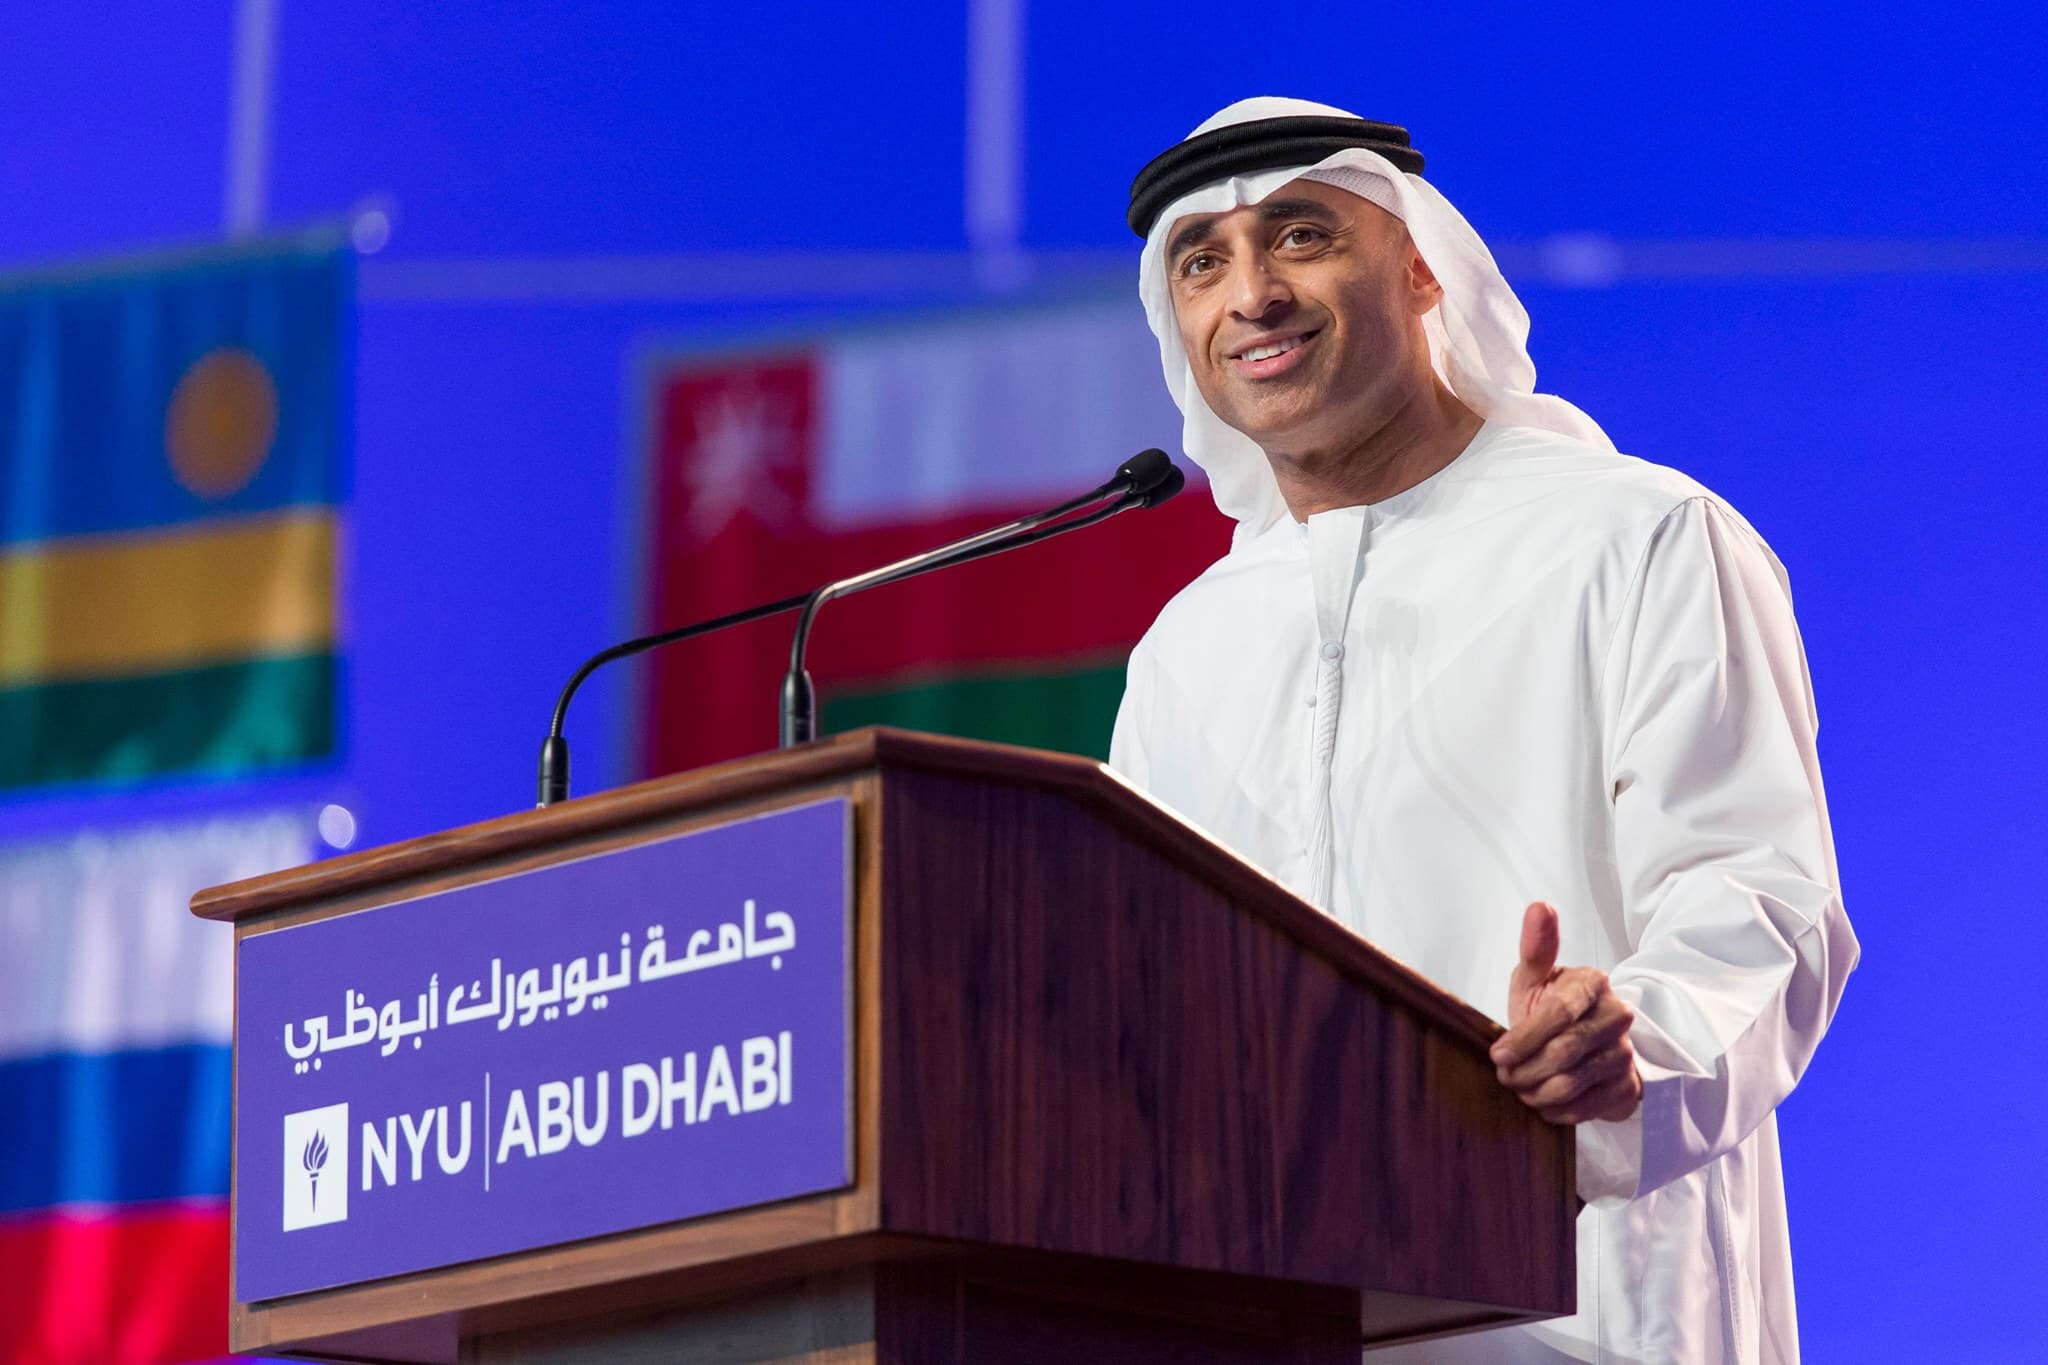  In his keynote address to the NYU Abu Dhabi class of 2016, United Arab Emirates Ambassador to the United States Yousef Al Otaiba praised graduates for their bold thinking, willingness to take risks, and openness to other people and perspectives.  Ambassador Al Otaiba emphasized how this forward-thinking outlook will create a more positive future for the region and the world. “You have a responsibility to be an advocate for the values that you’ve embraced here at NYU Abu Dhabi – the very same values that wi